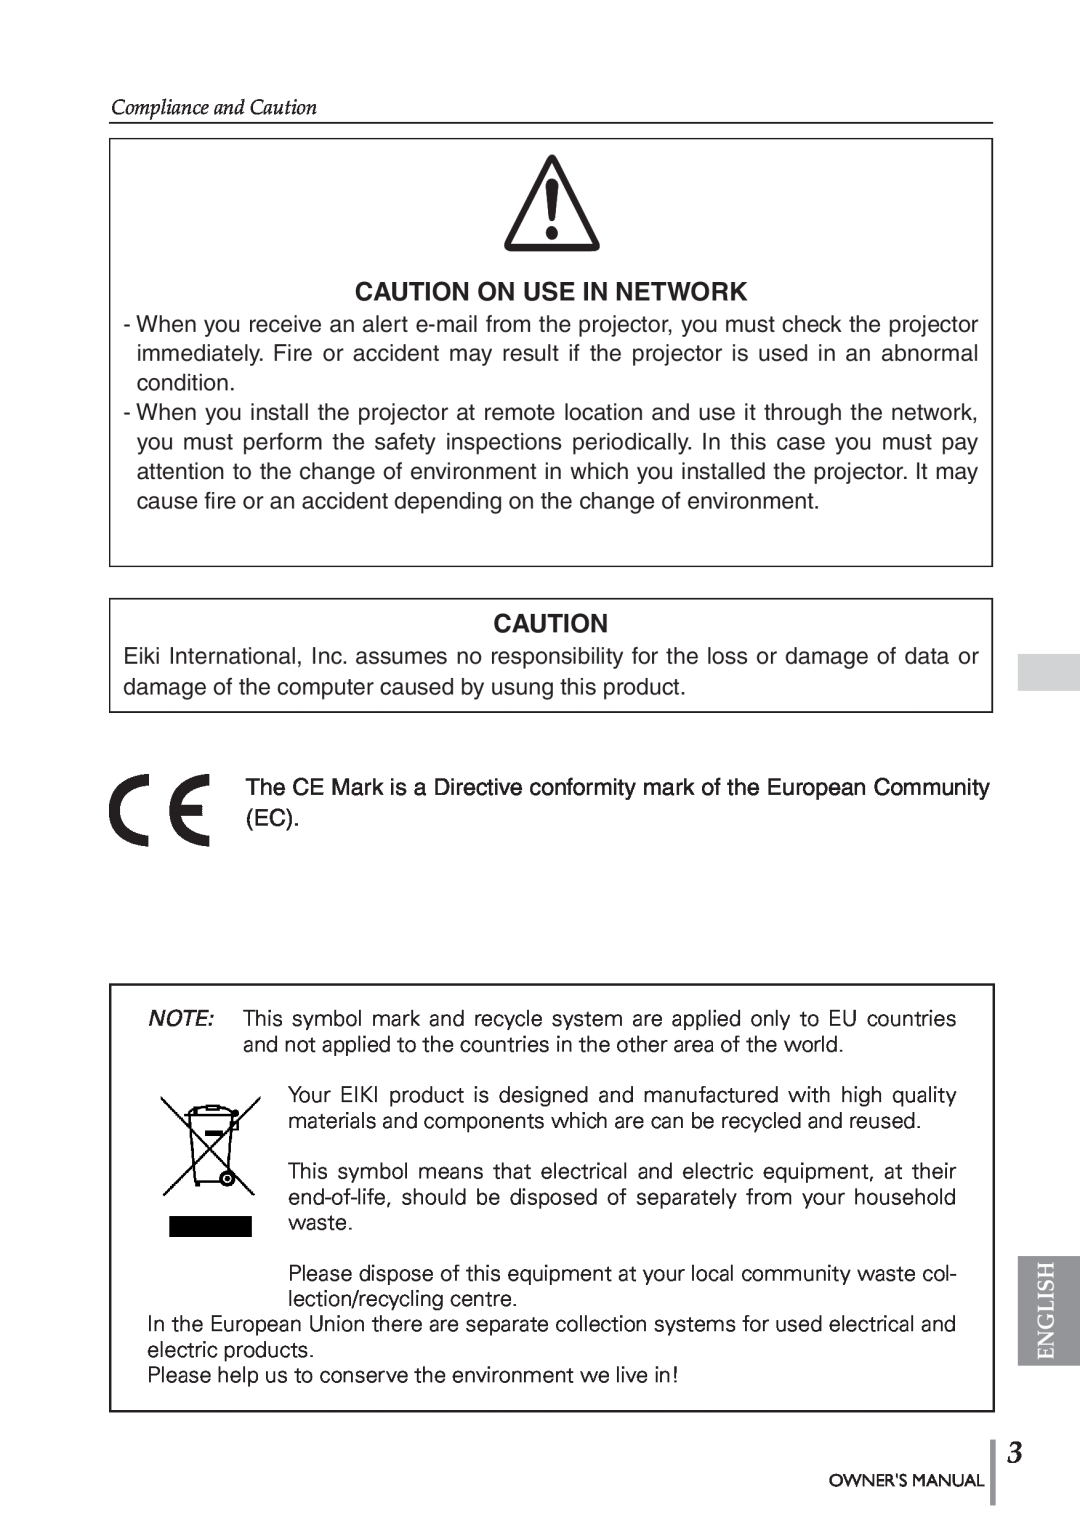 Eiki PJNET-300 owner manual Caution On Use In Network, English 